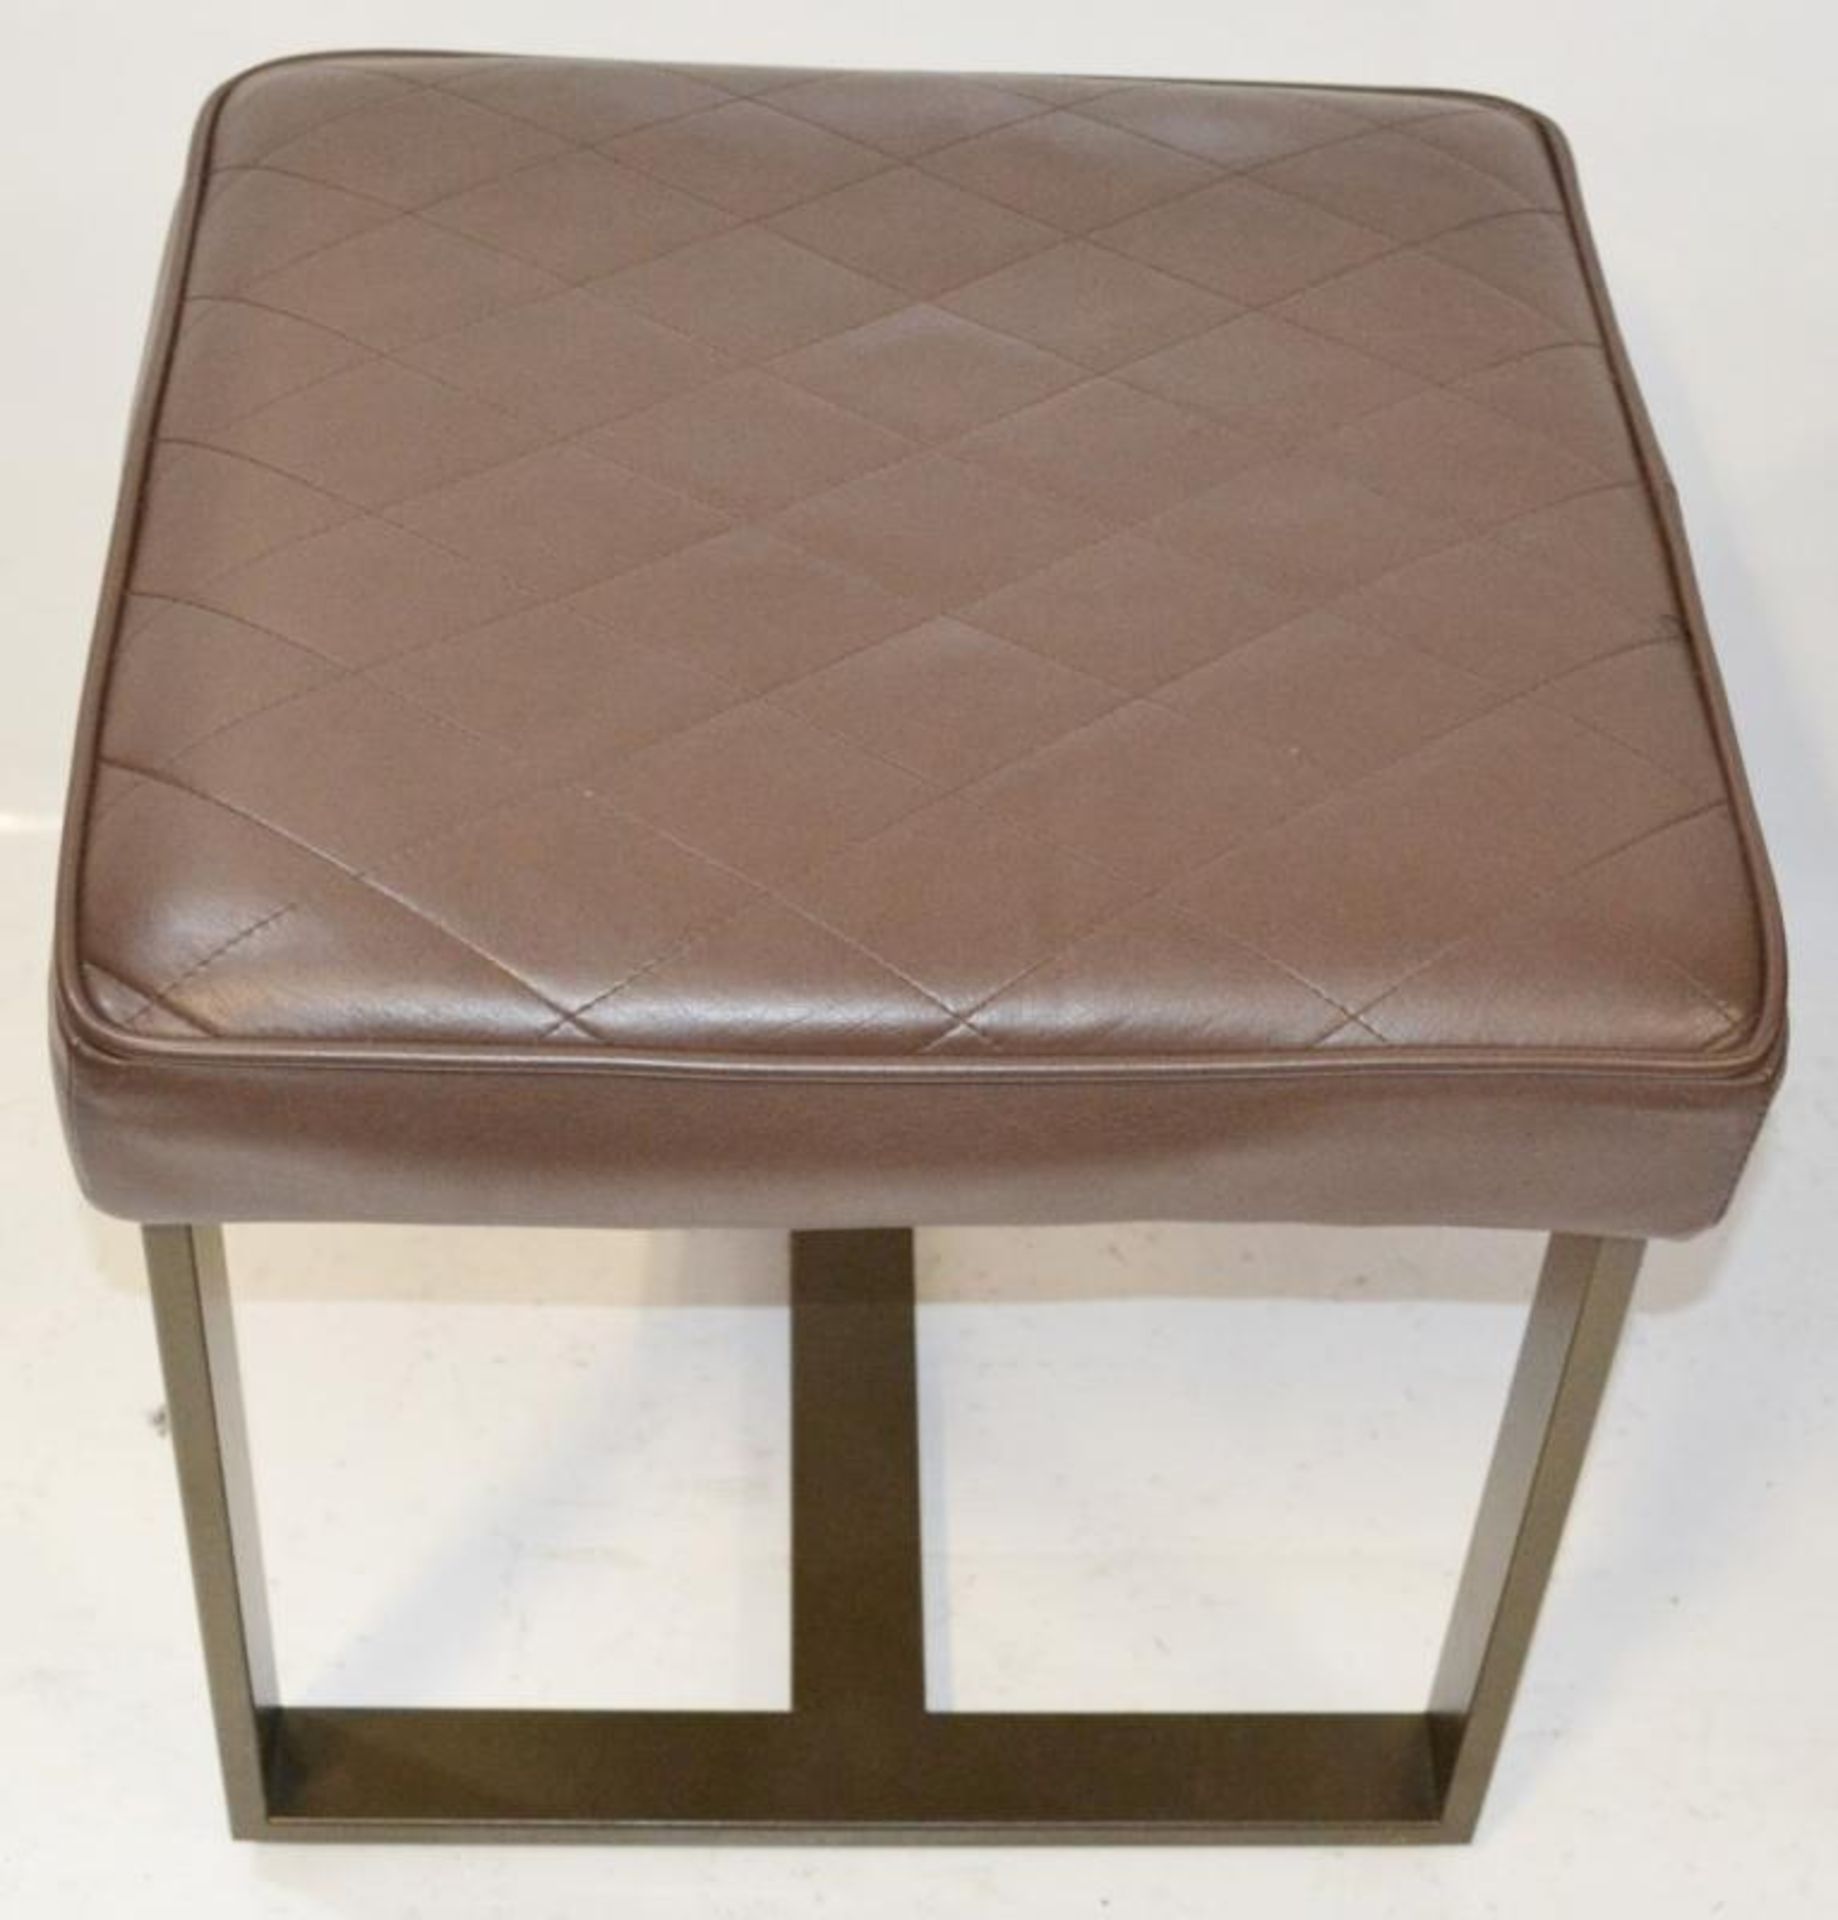 4 x Upholstered Stools In A Brown Faux Leather - Recently Removed From A Major UK Store In Very Goo - Image 3 of 5